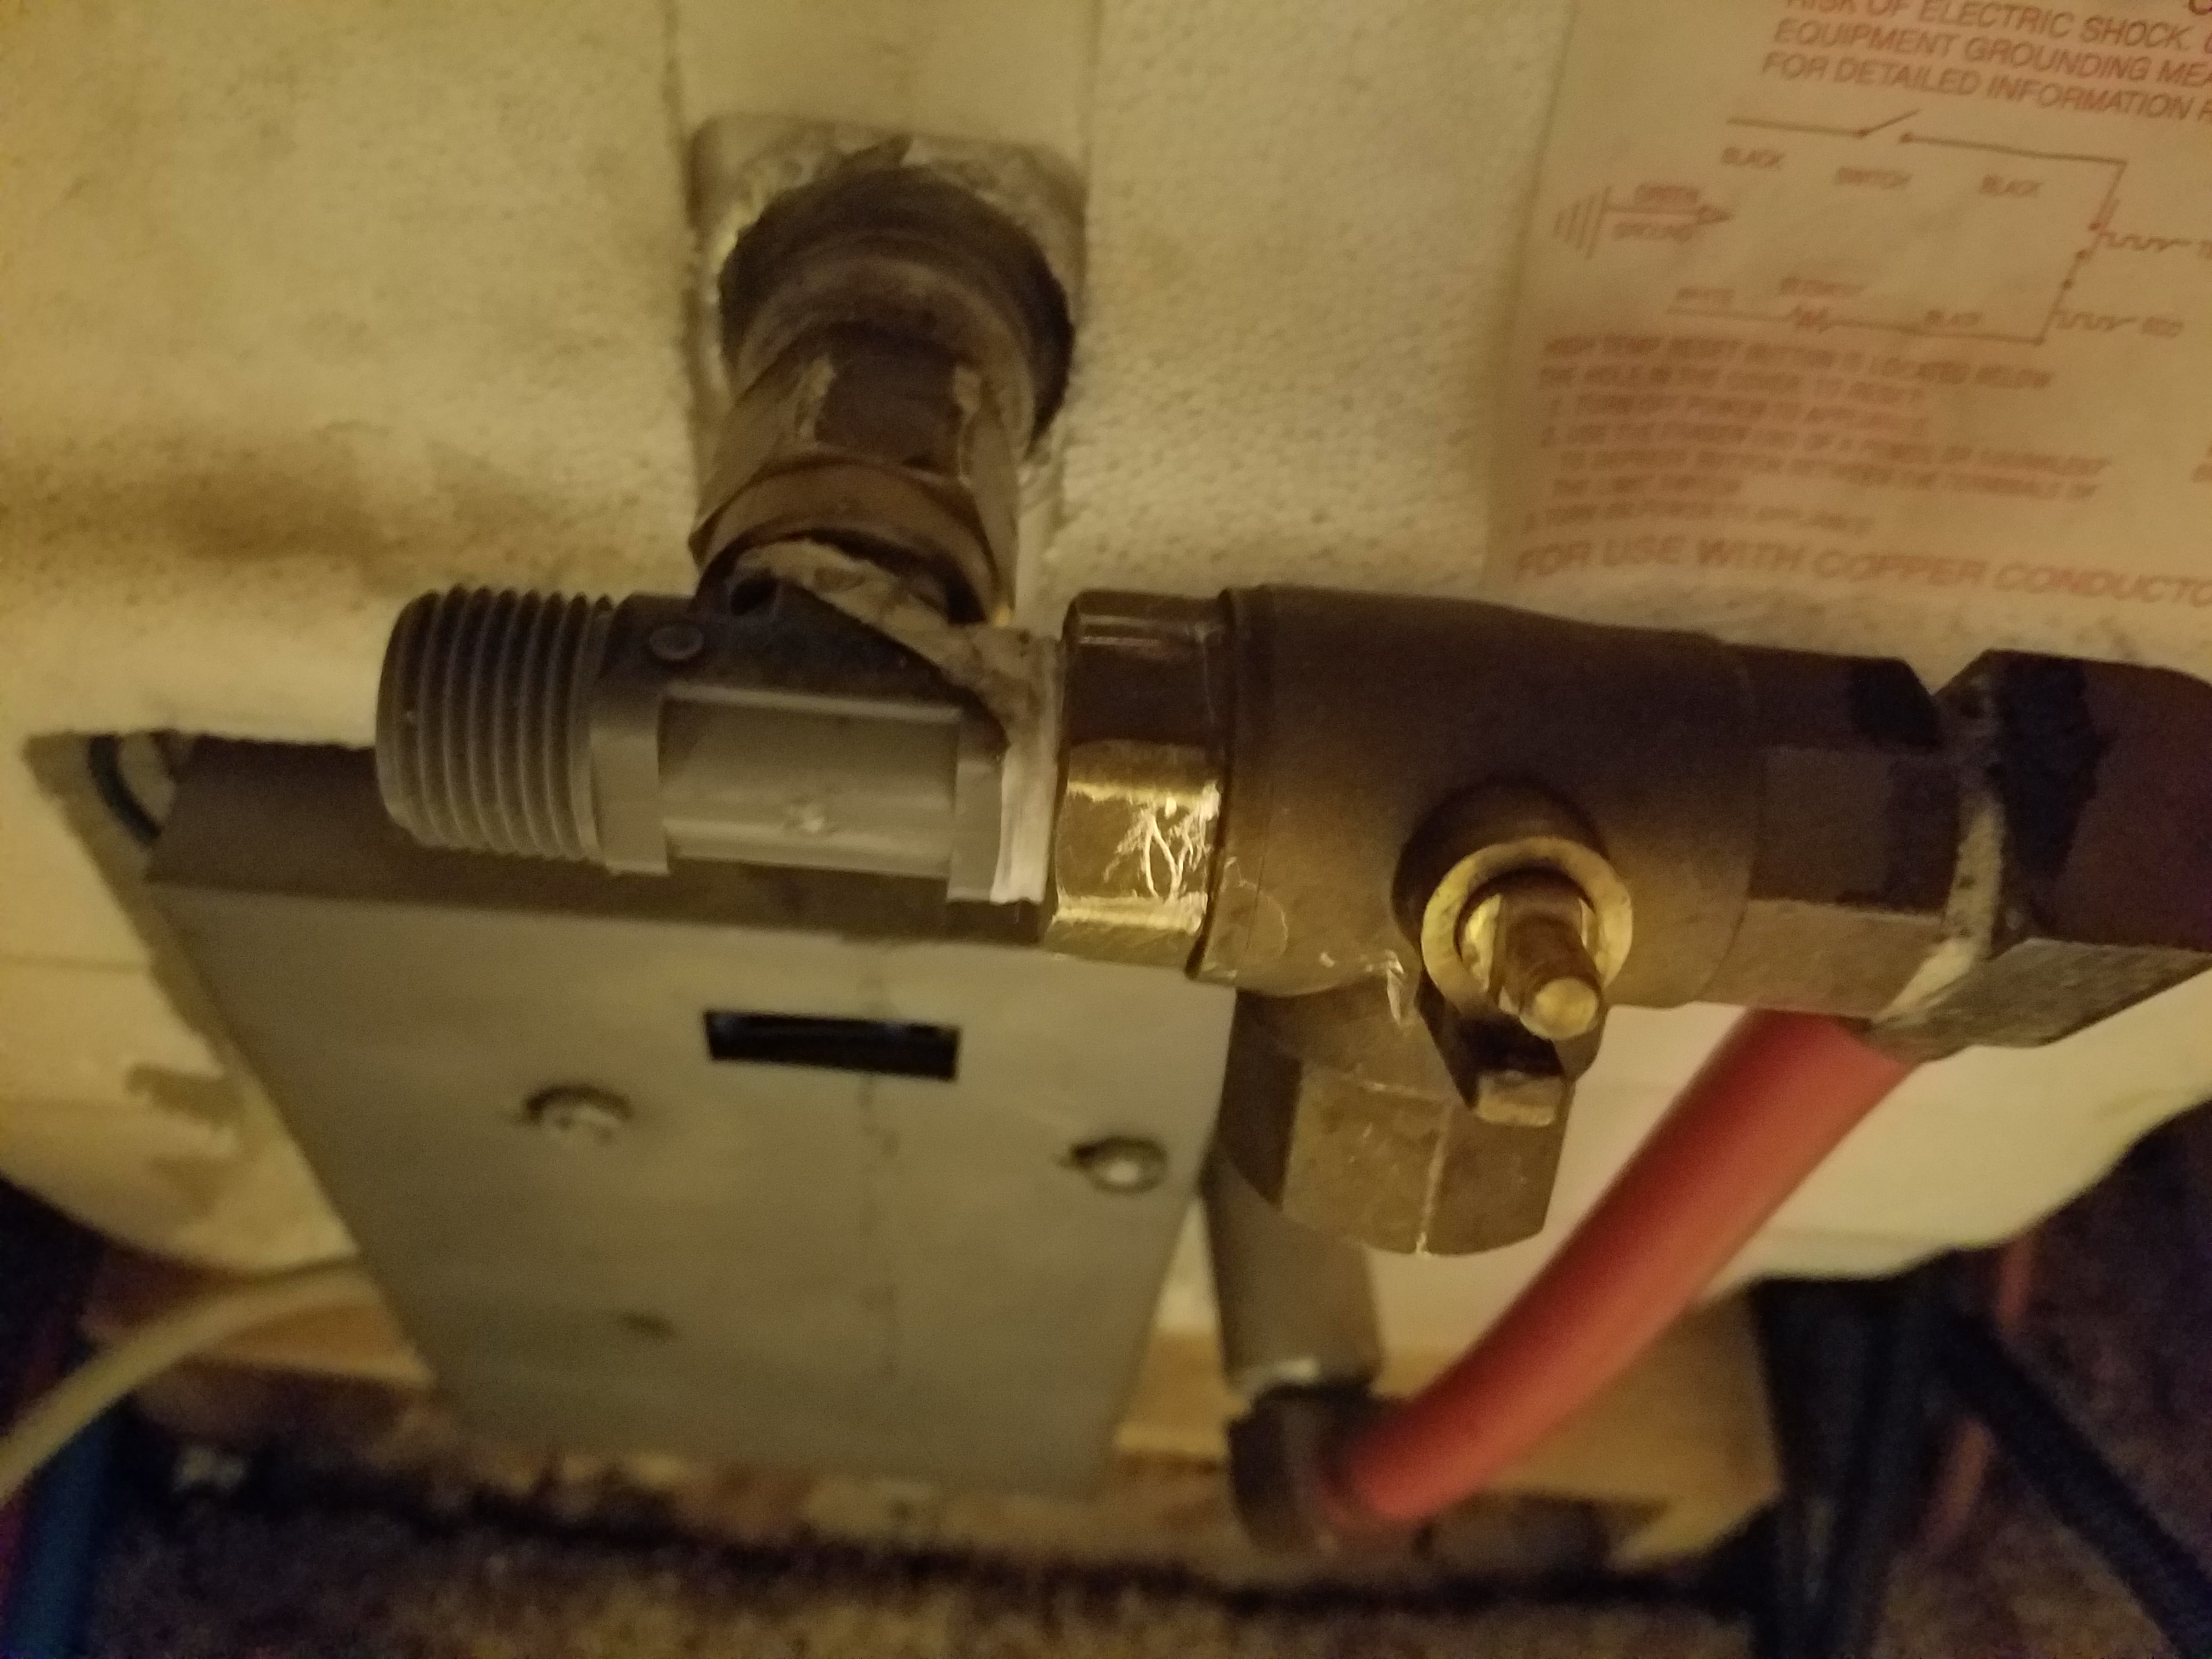 Water Heater Check Valve - Water and Holding Tanks - FMCA RV Forums – A